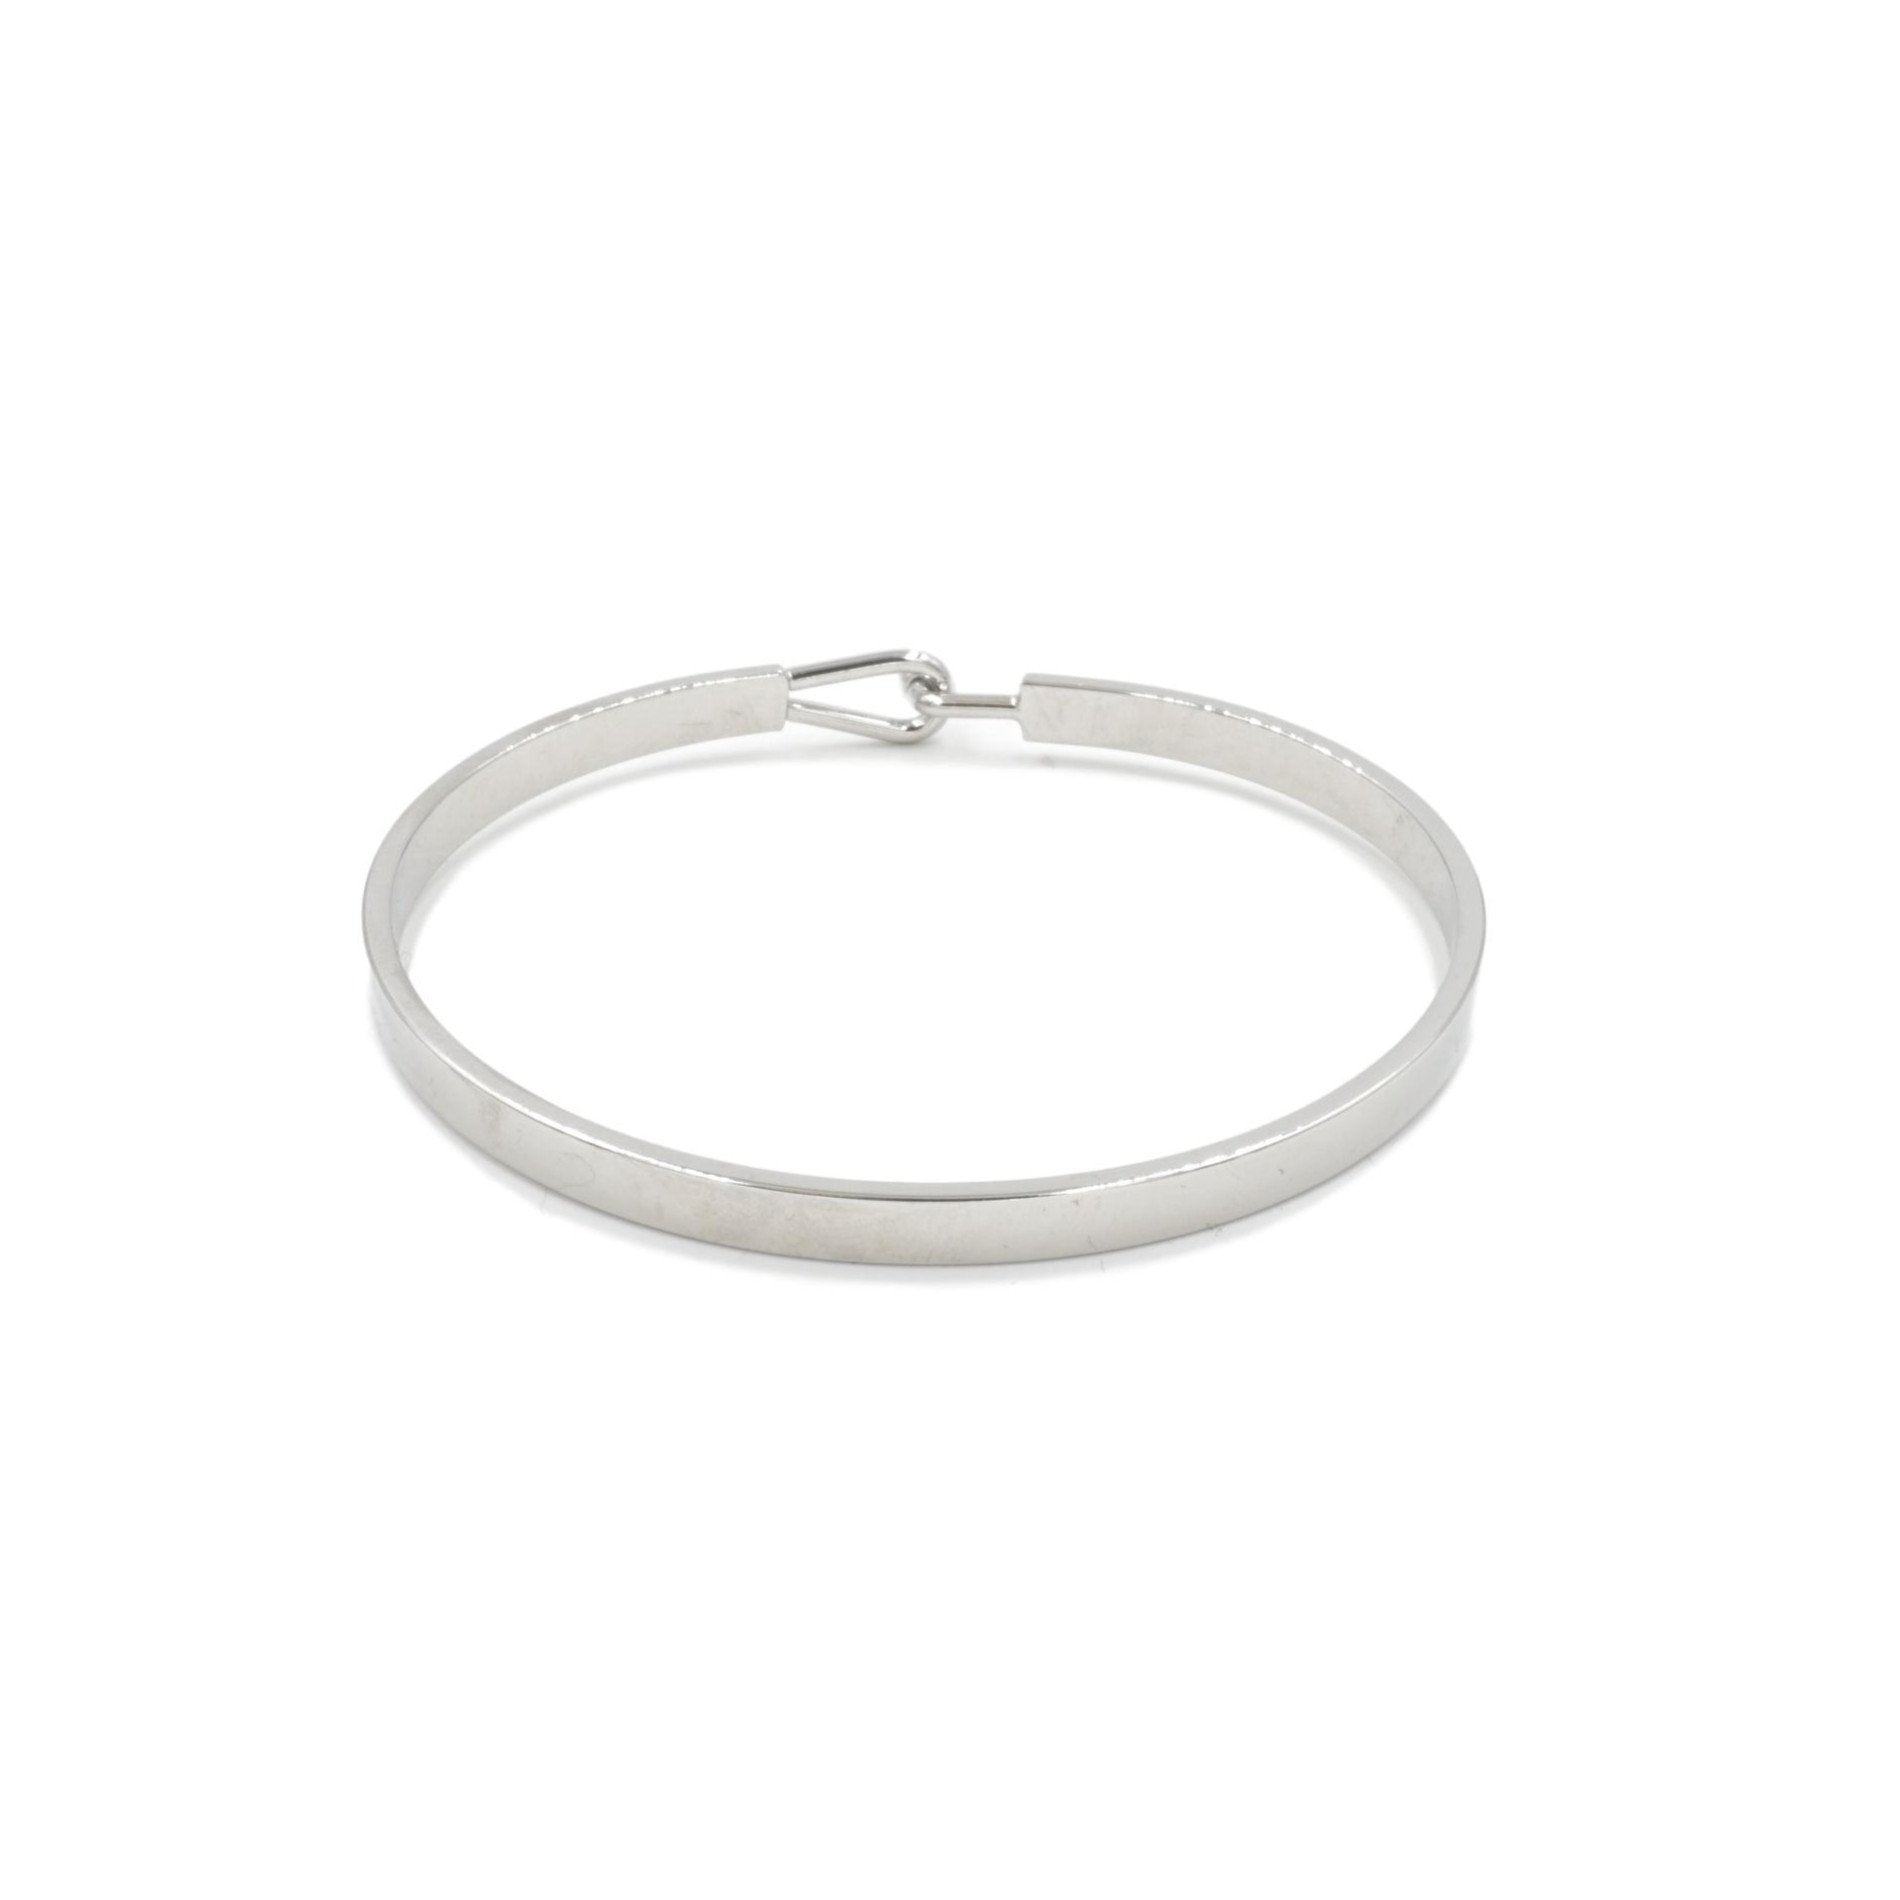 Cuff Collection - Silver Bracelet - Kinsley Armelle